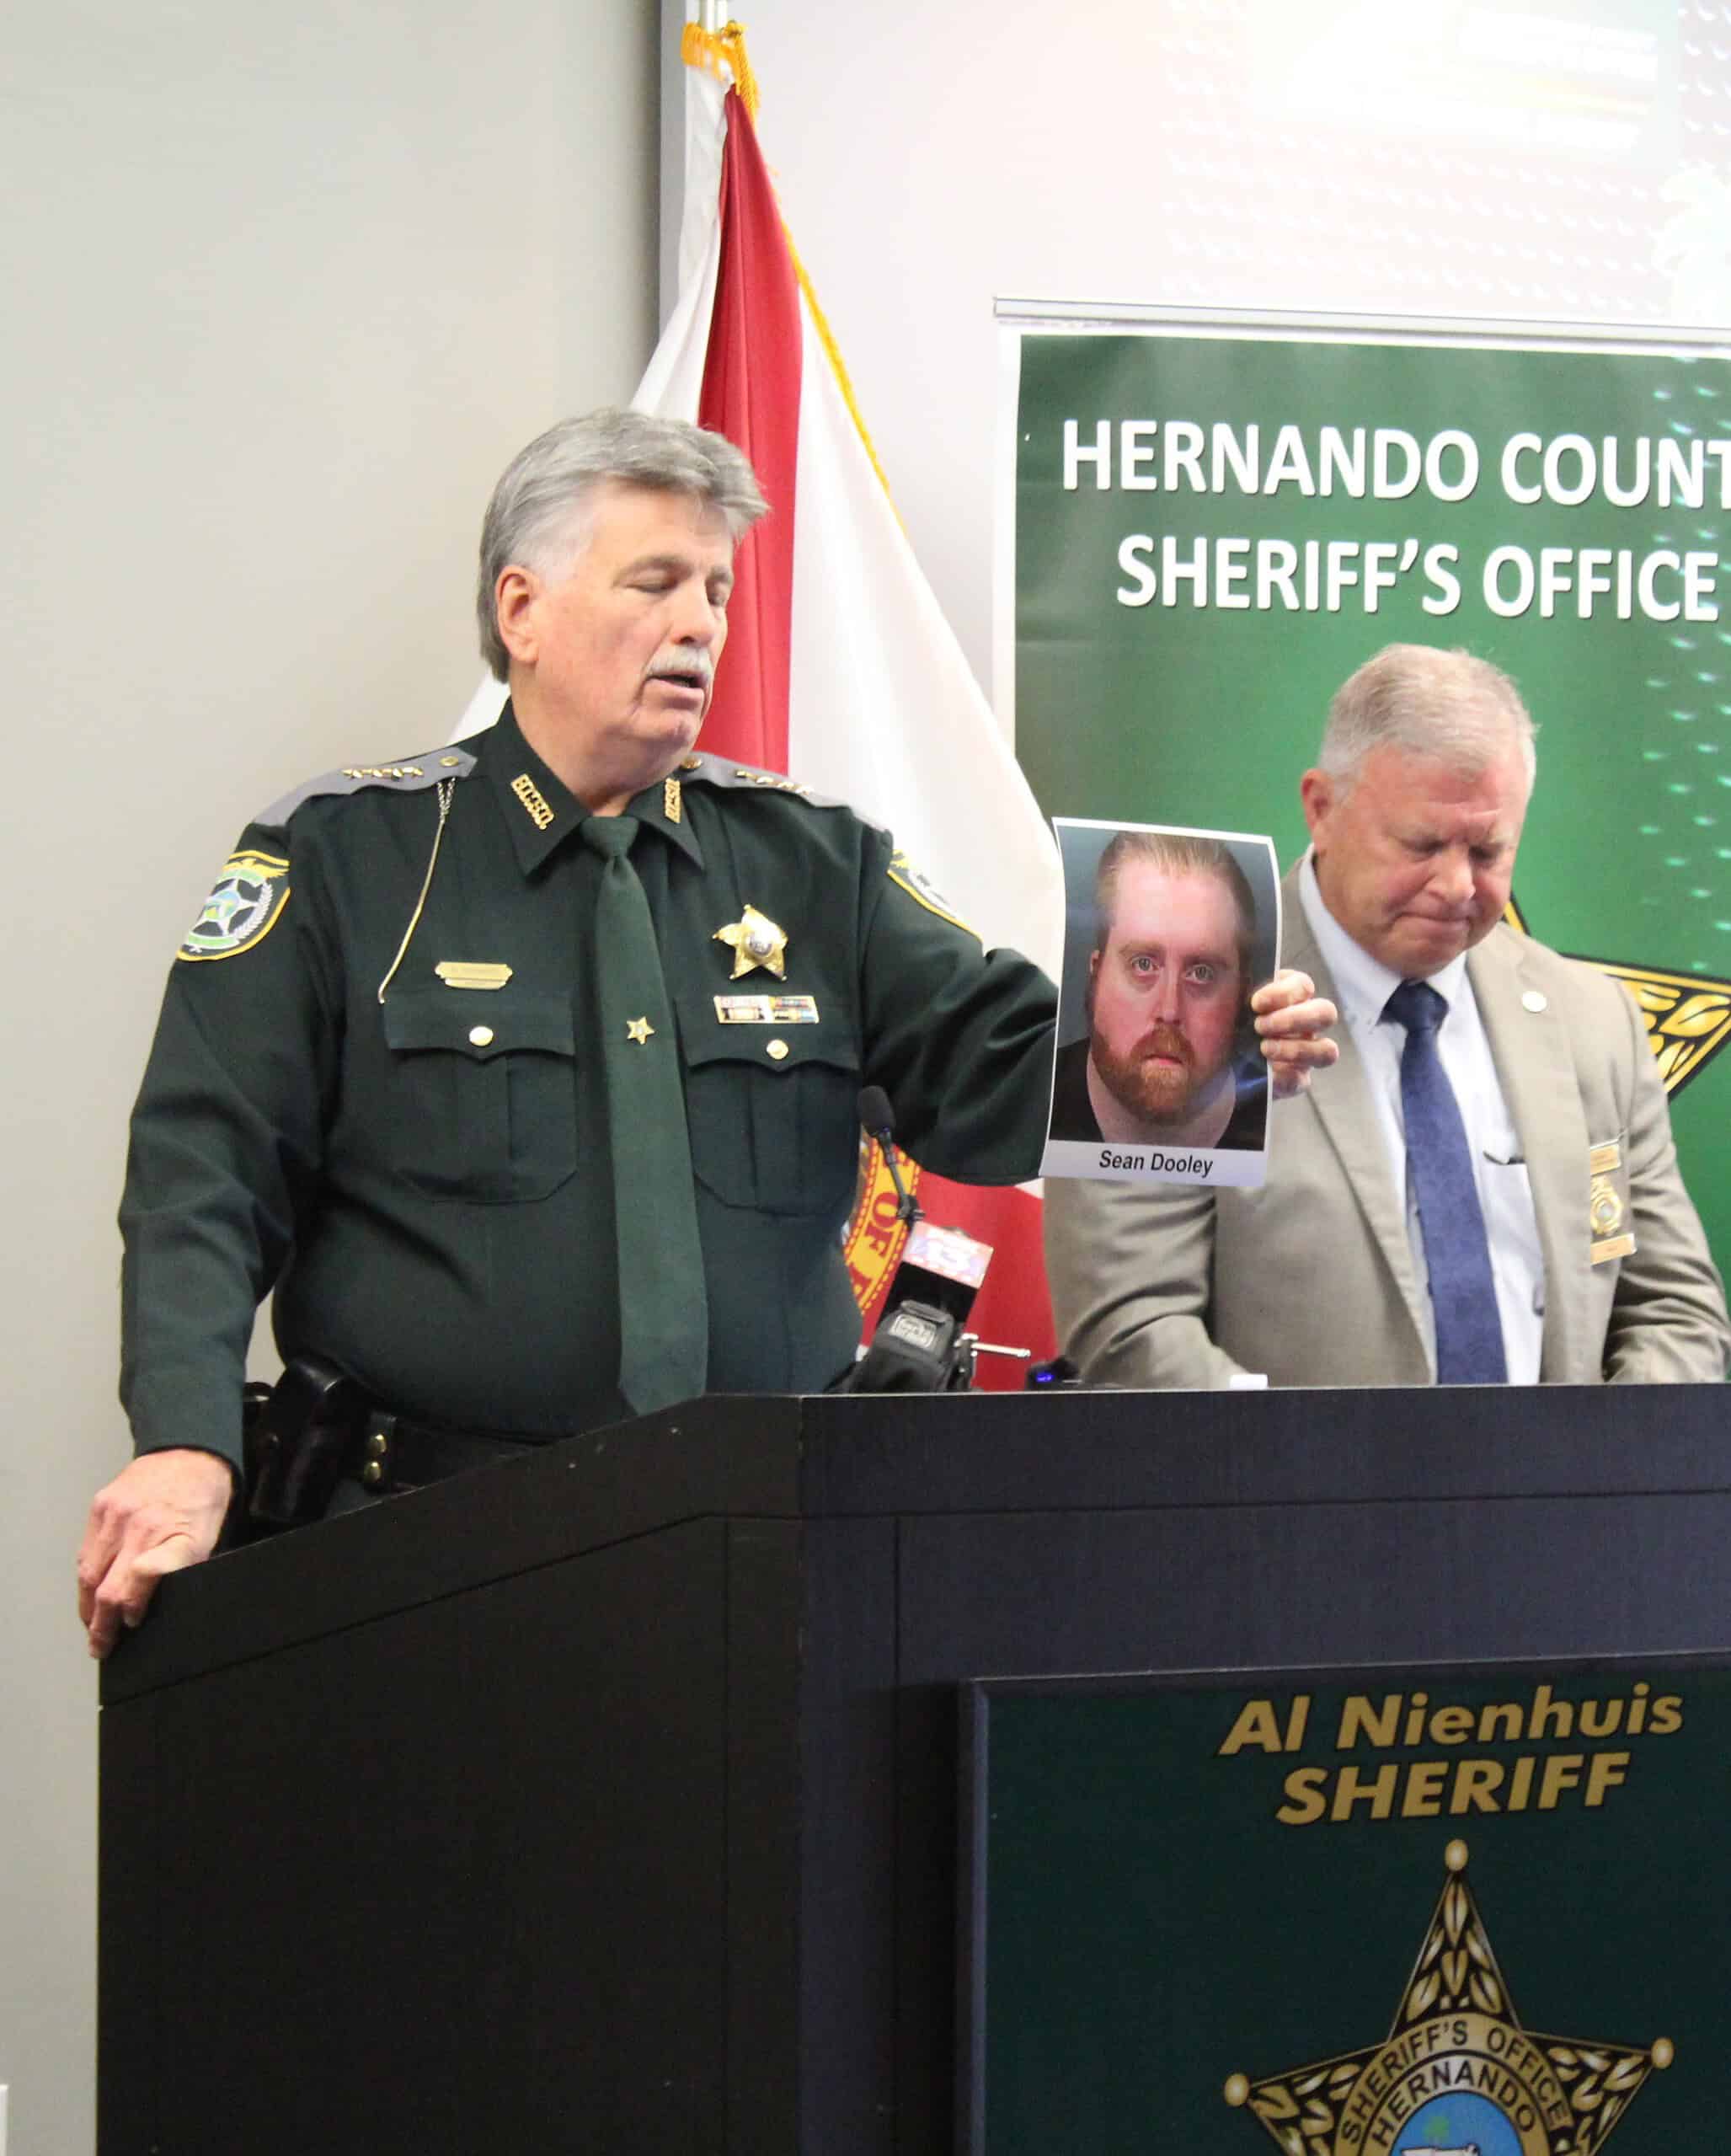 Sheriff Al Nienhuis discusses the charges for one of the arrested individuals at Thursday's press conference. [Hernando Sun Staff]